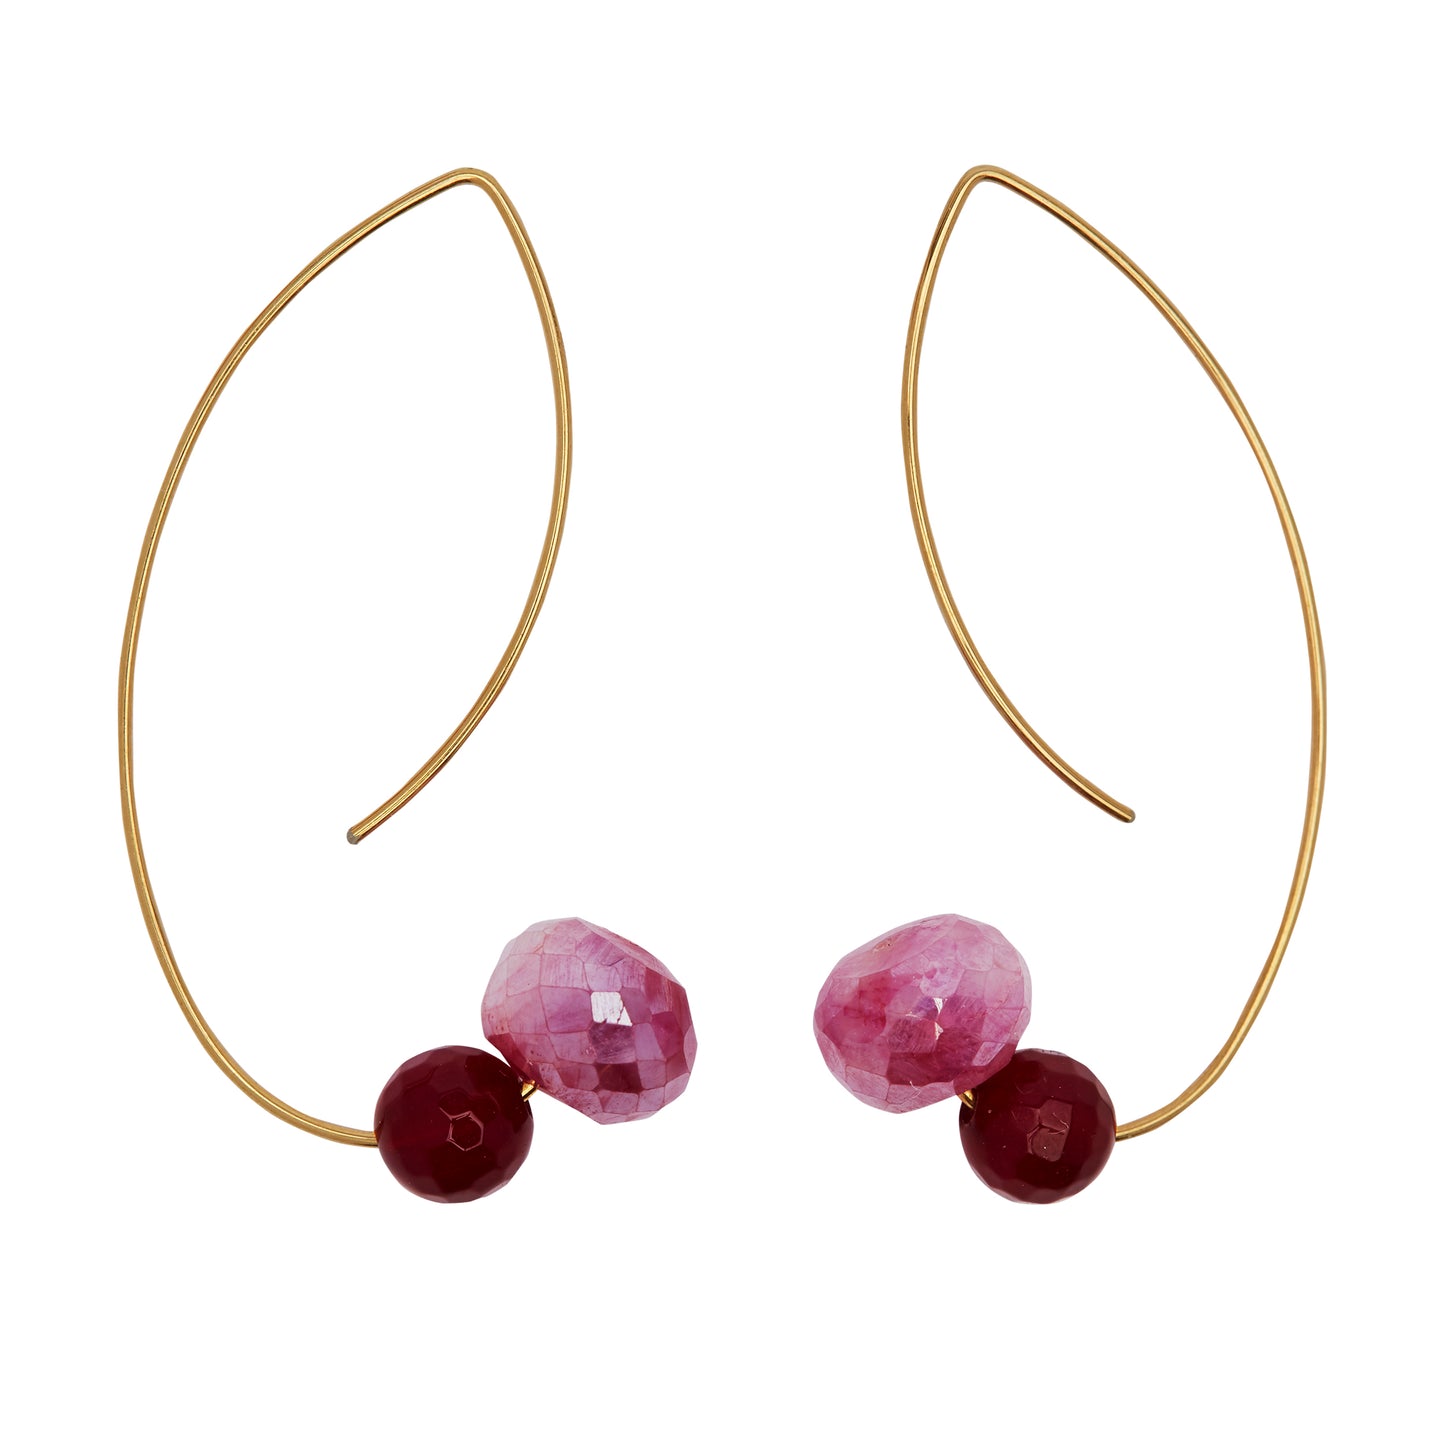 Angled Curve Earrings with Pink Mystic Chalcedony Roundel and Red Agate